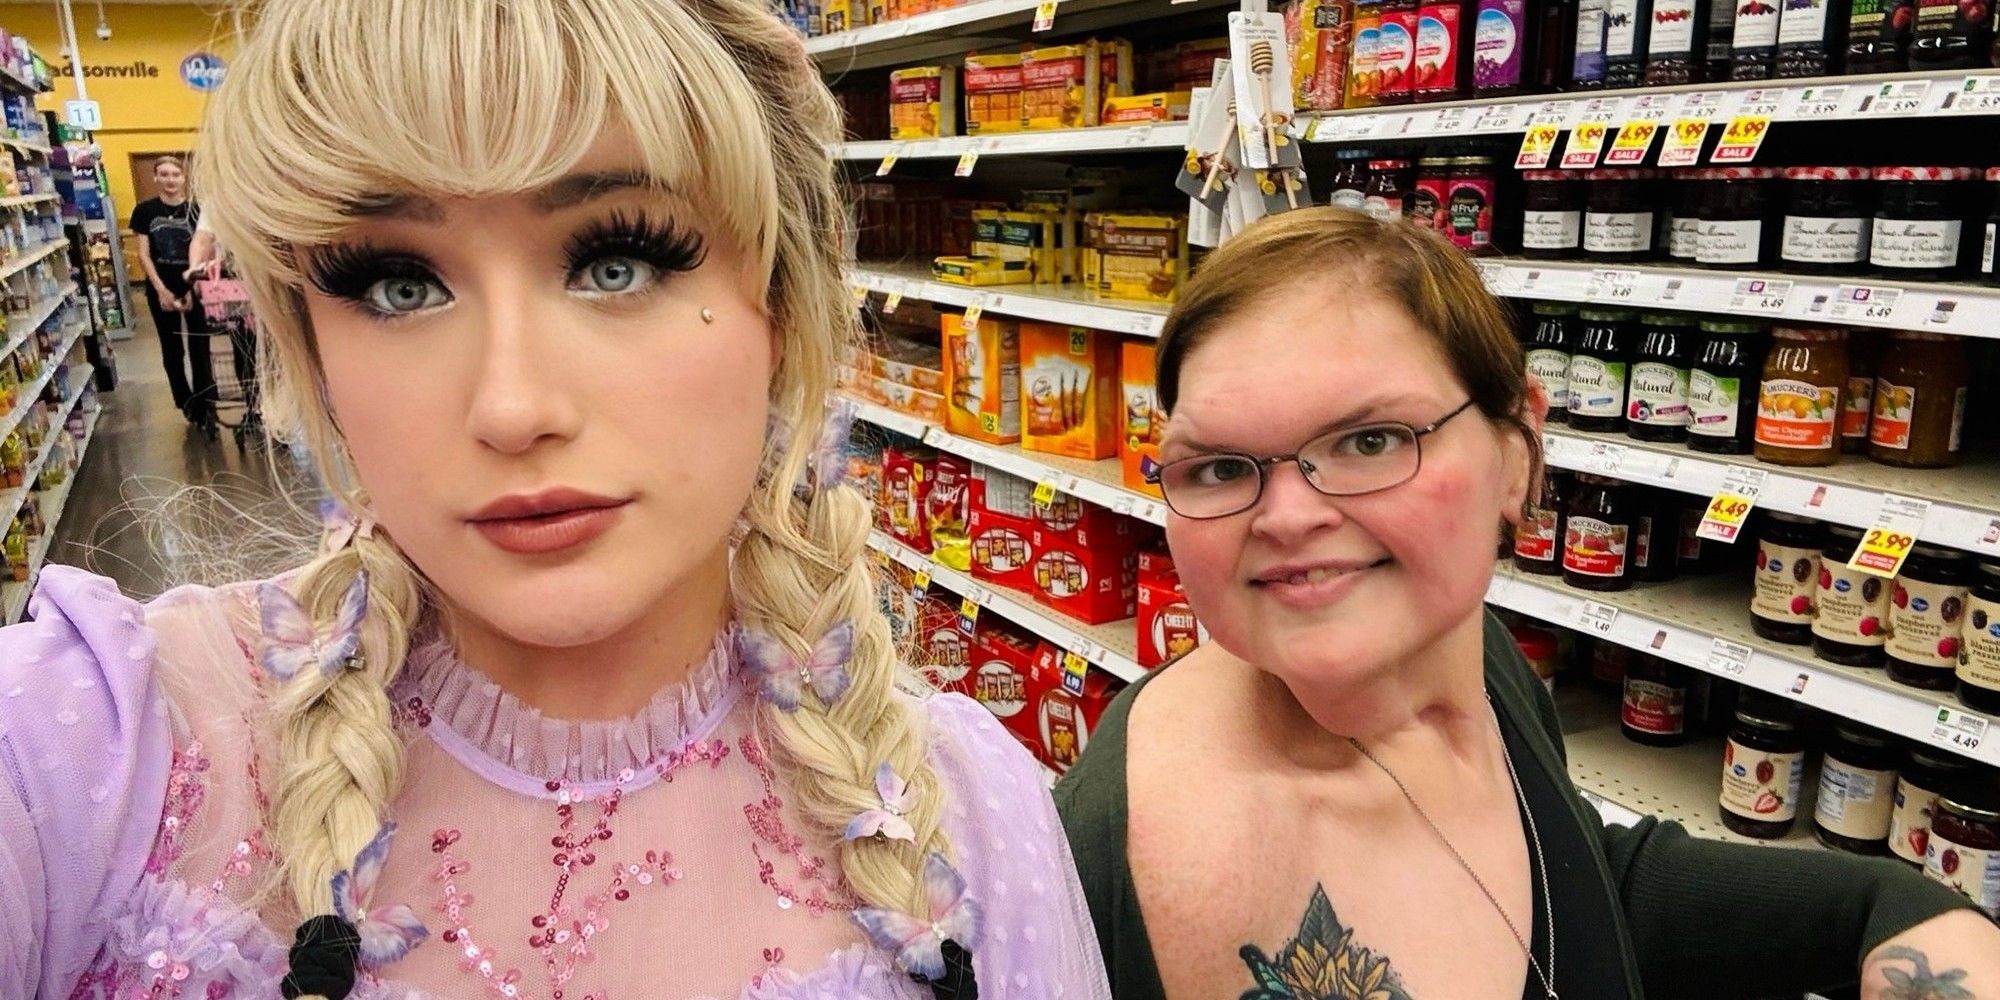 Tammy Slaton with Haley Michelle at the grocery store